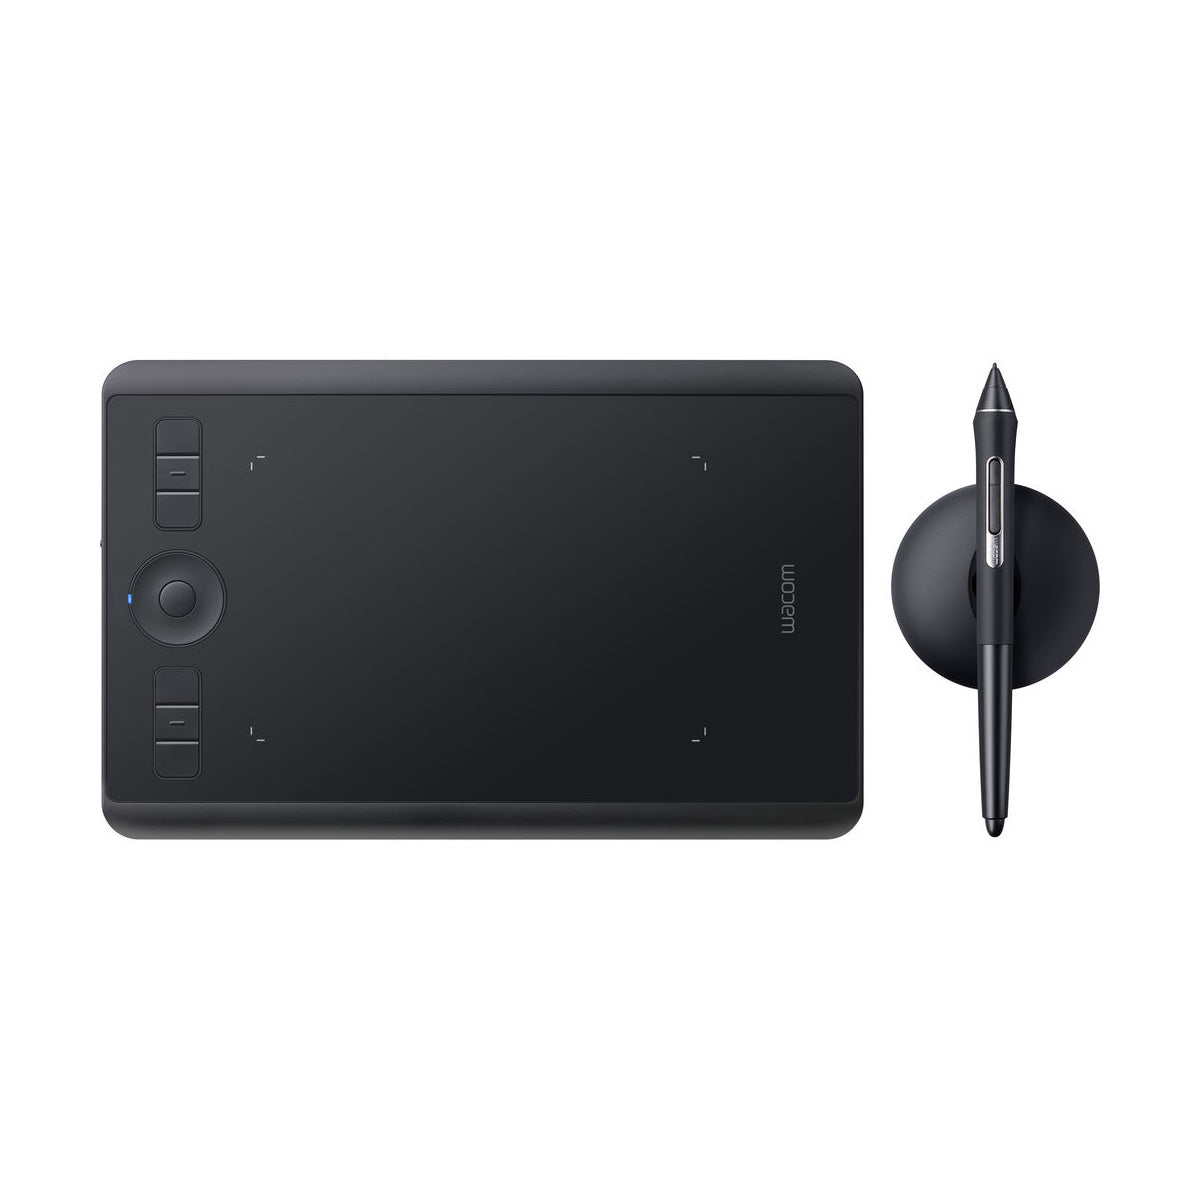 Wacom Intuos Pro Pen and Touch Tablet (Small)